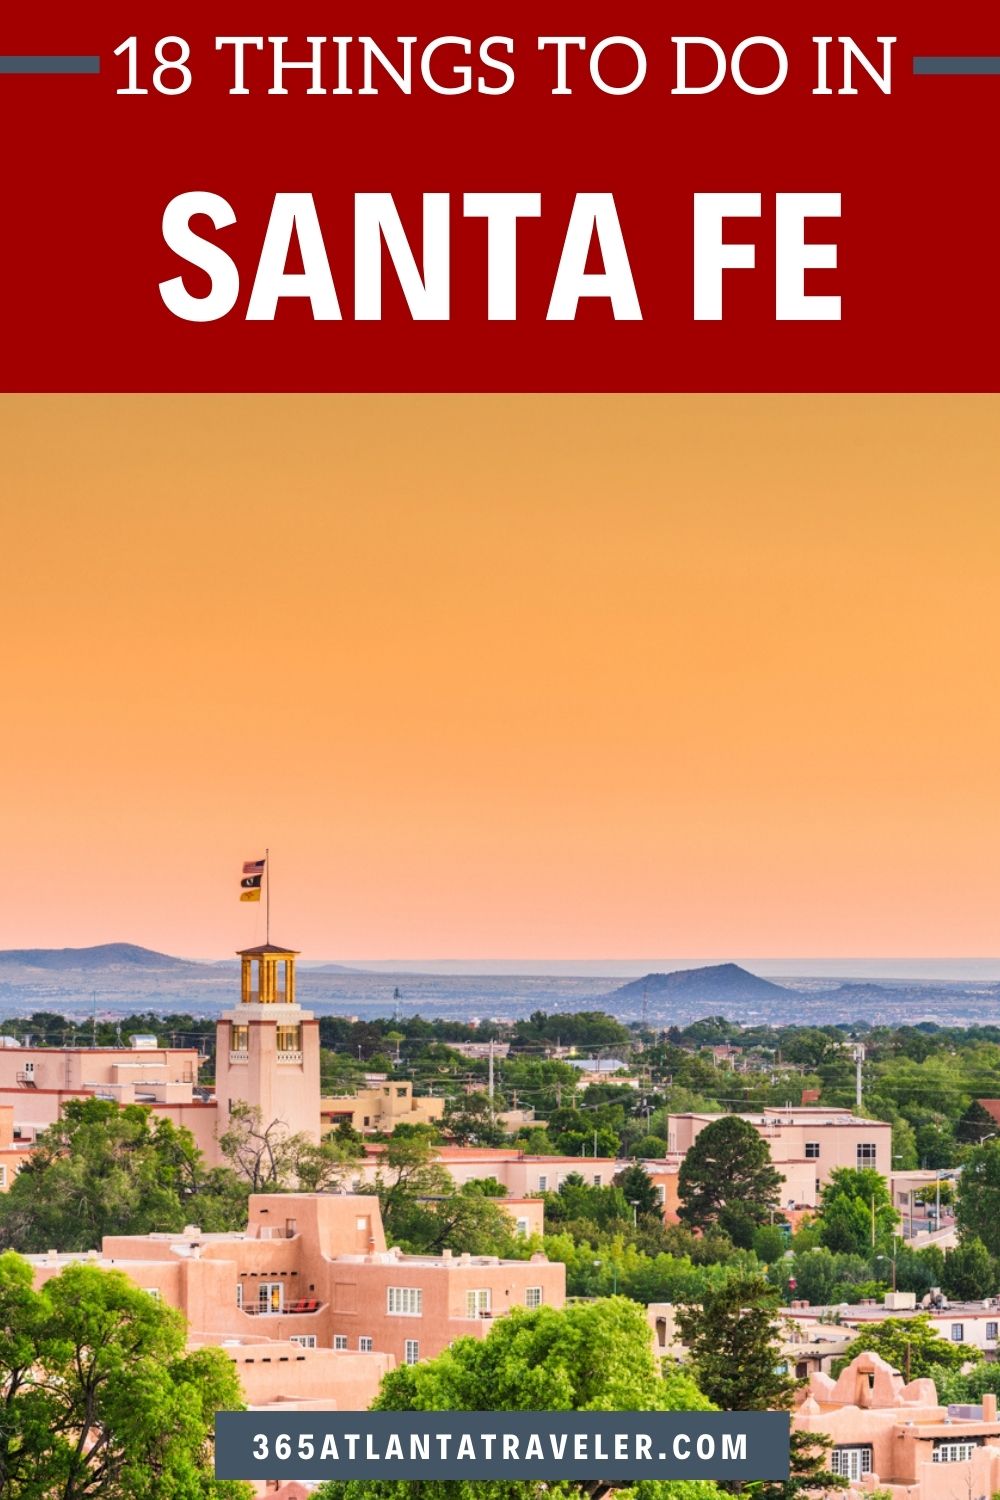 18 THINGS TO DO IN SANTA FE YOU'RE GOING TO LOVE